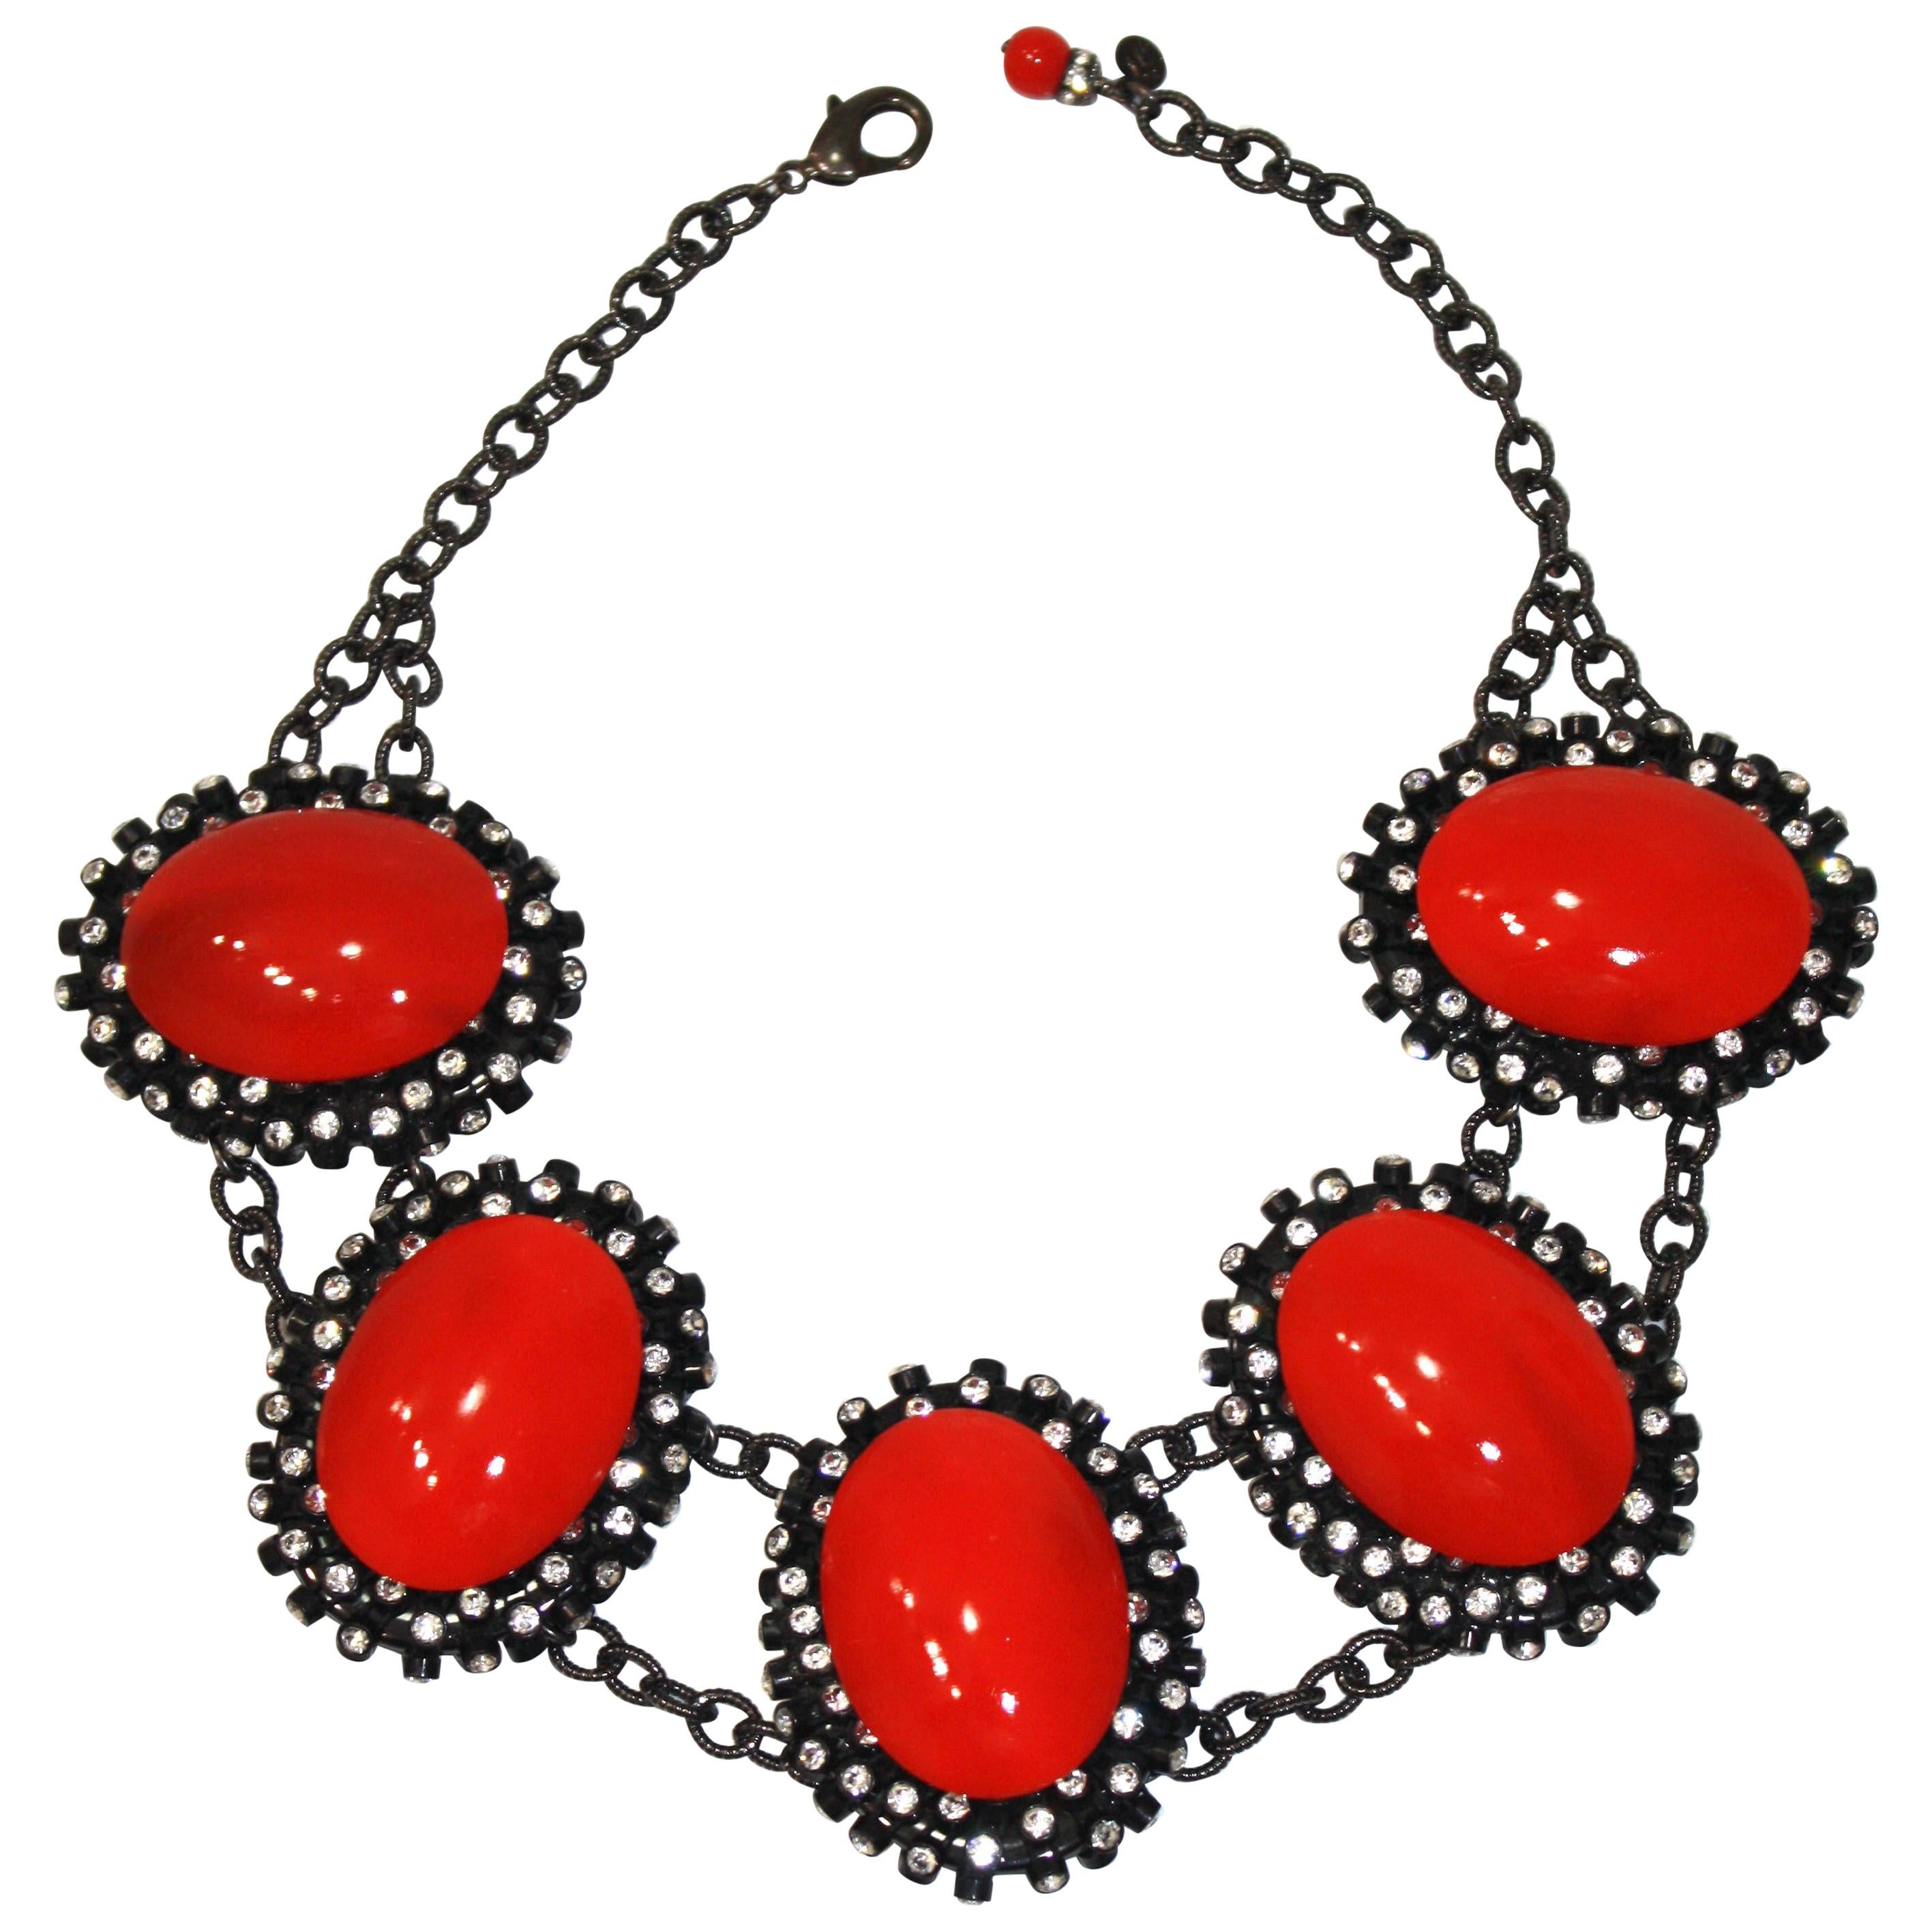 Francoise Montague Red Agate, Swarovski Crystal, and Black Rhodium Necklace.